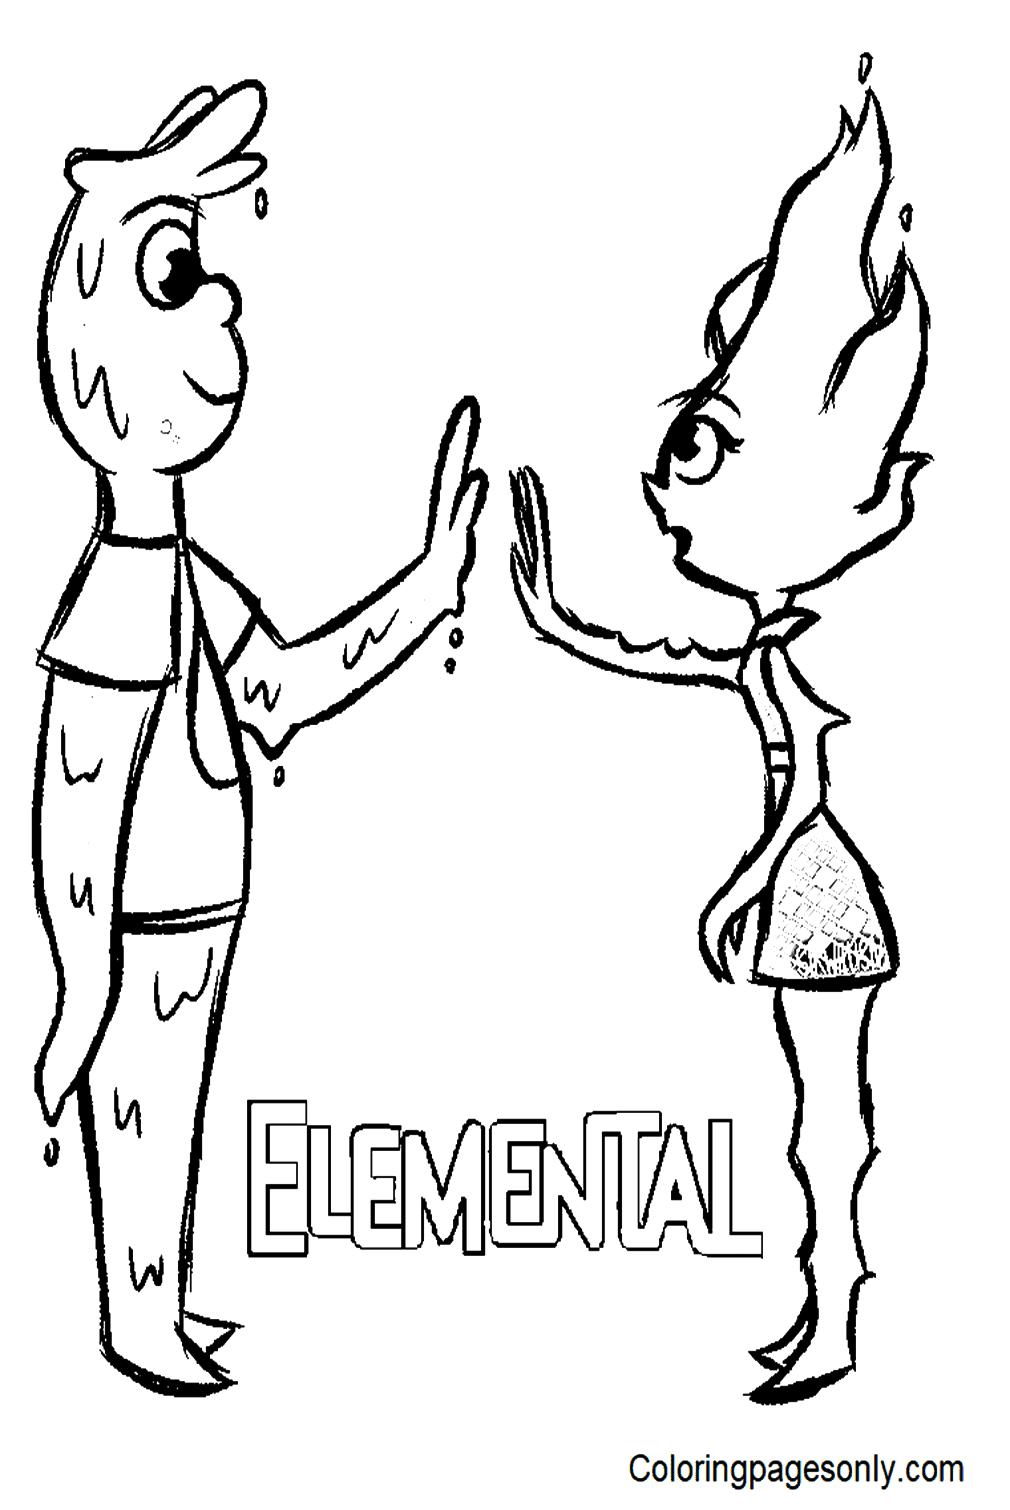 Elemental Coloring Sheet Coloring Pages